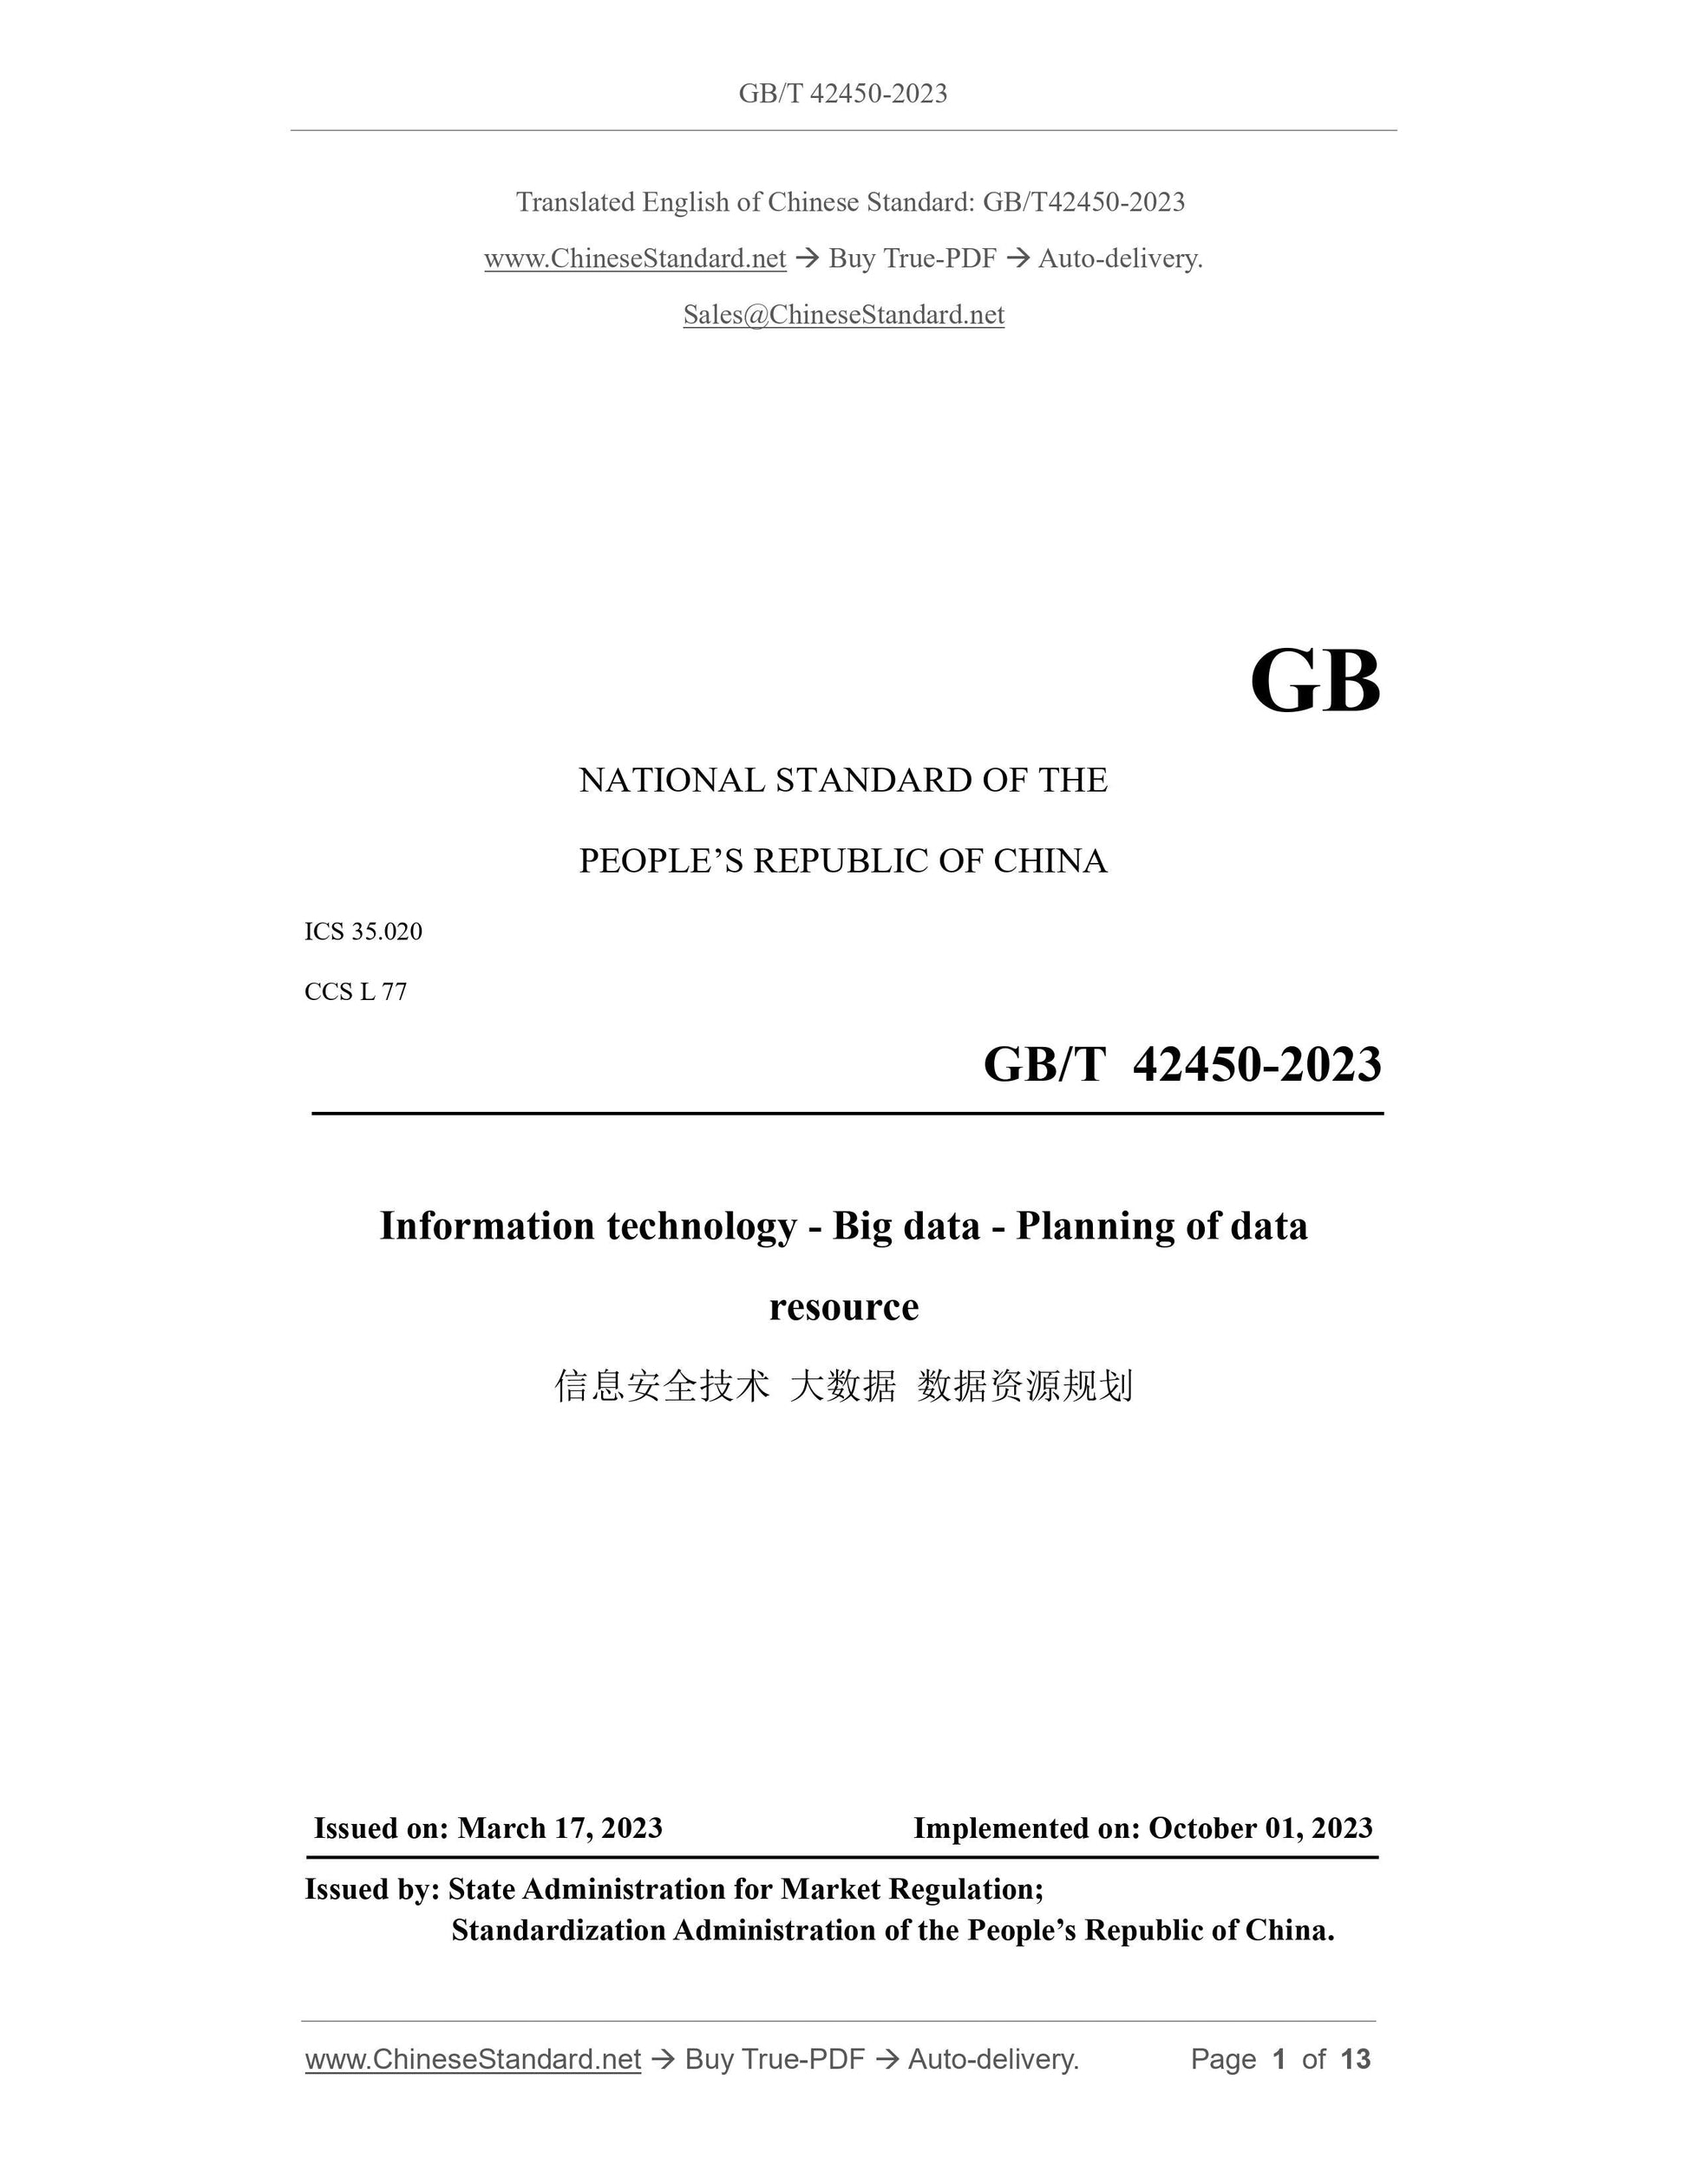 GB/T 42450-2023 Page 1